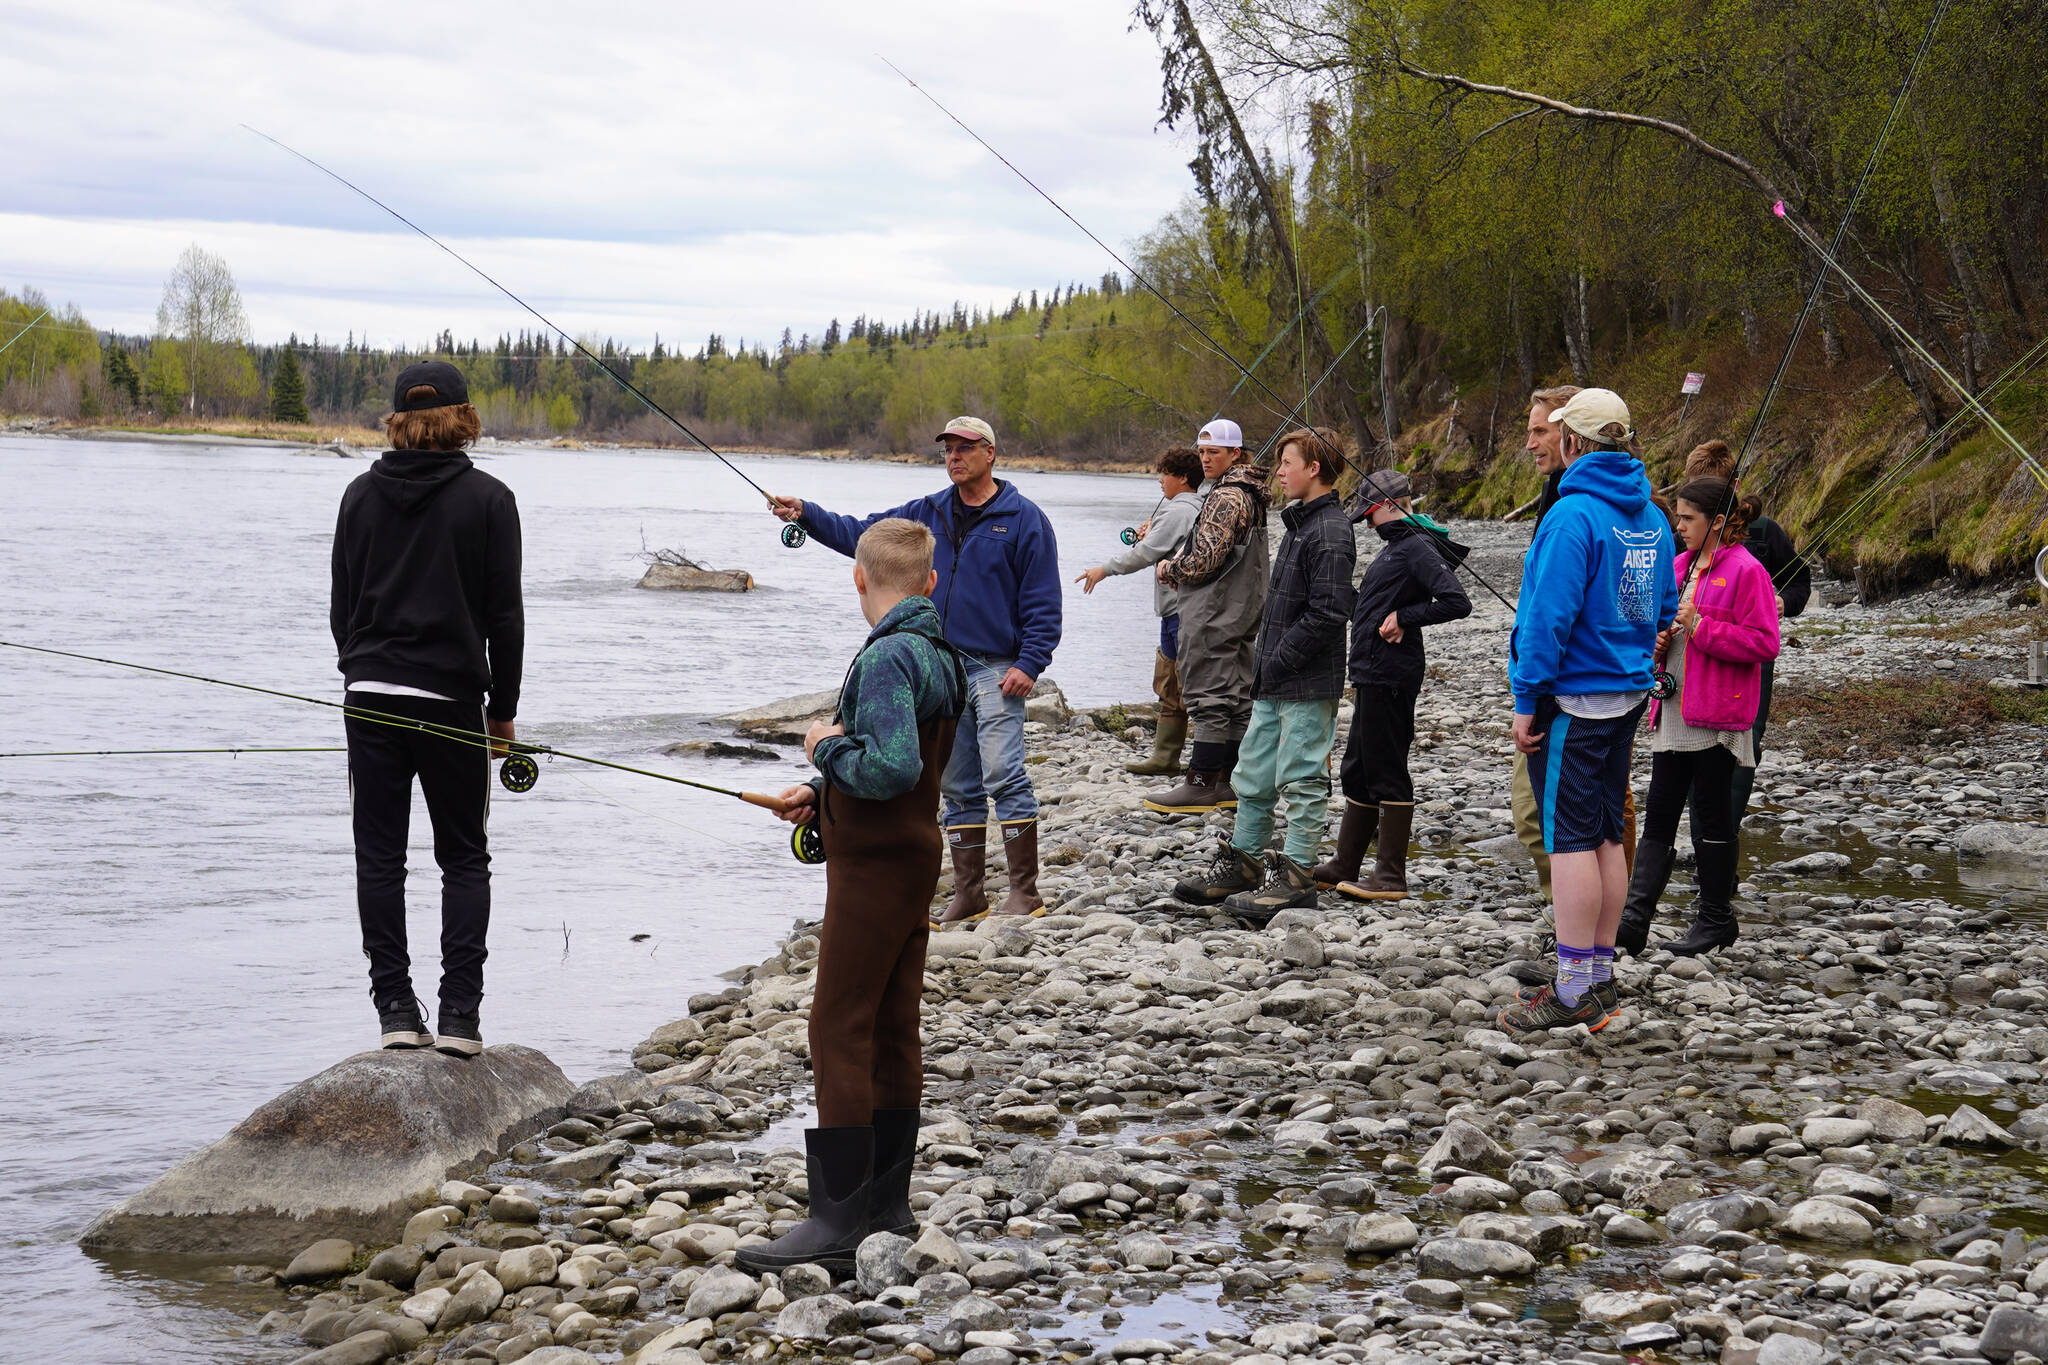 Dave Atcheson demonstrates fly casting into the Kenai River to a crowd of middle schoolers during a kids camp put on by Trout Unlimited on Wednesday, May 24, 2023, at the Donald E. Gilman Kenai River Center in Soldotna, Alaska. (Jake Dye/Peninsula Clarion)